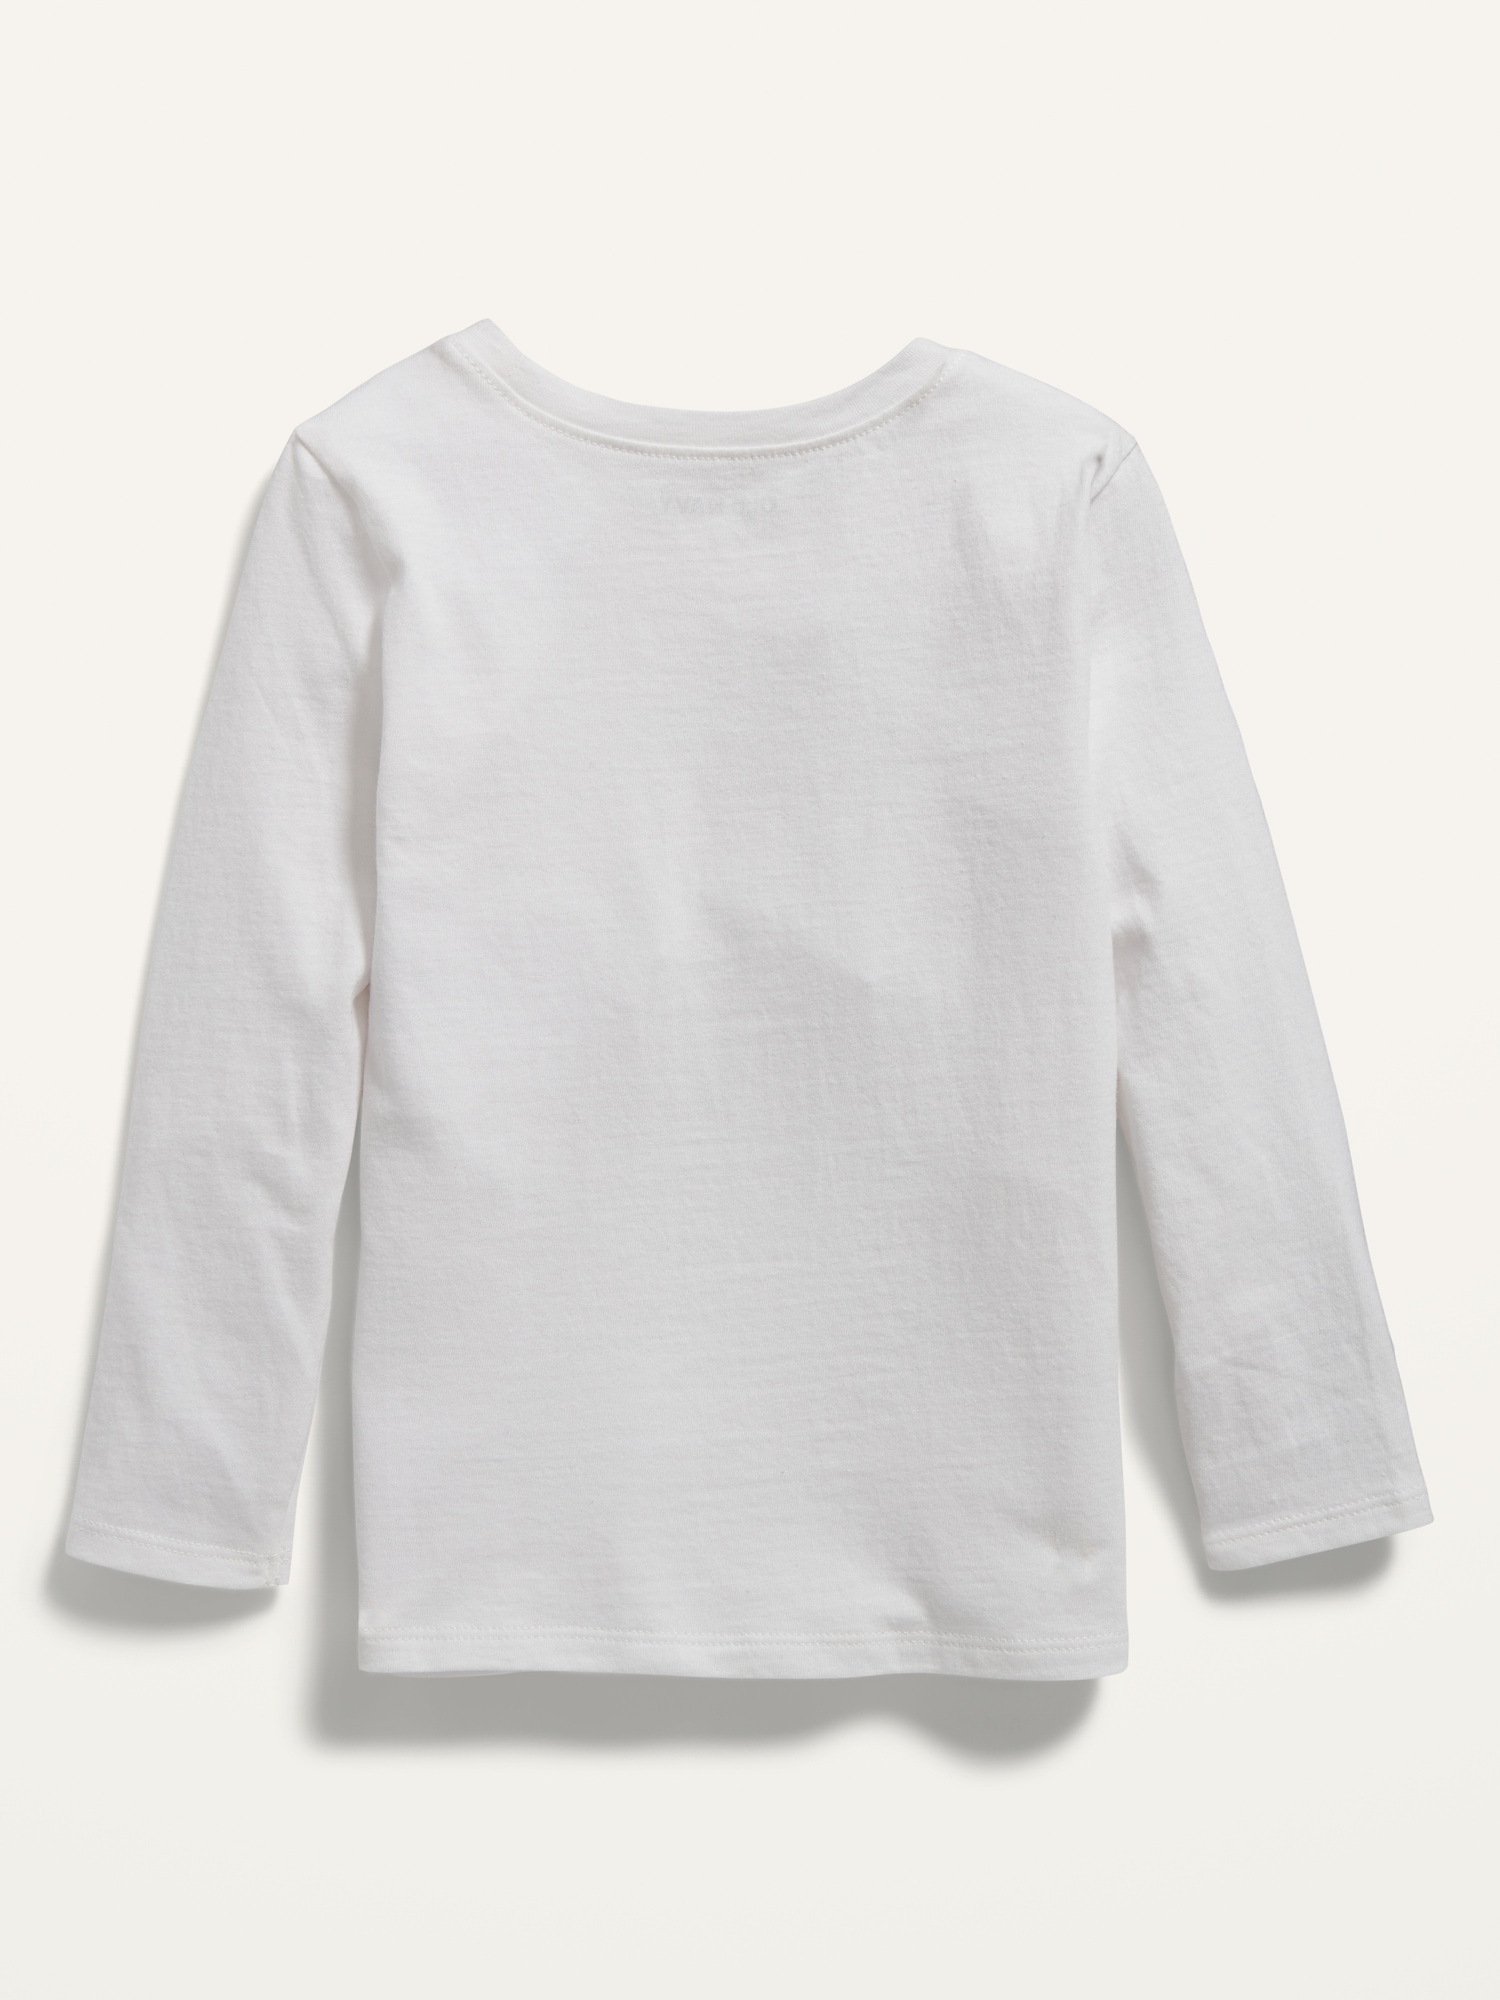 Unisex Solid Long-Sleeve T-Shirt for Toddler | Old Navy